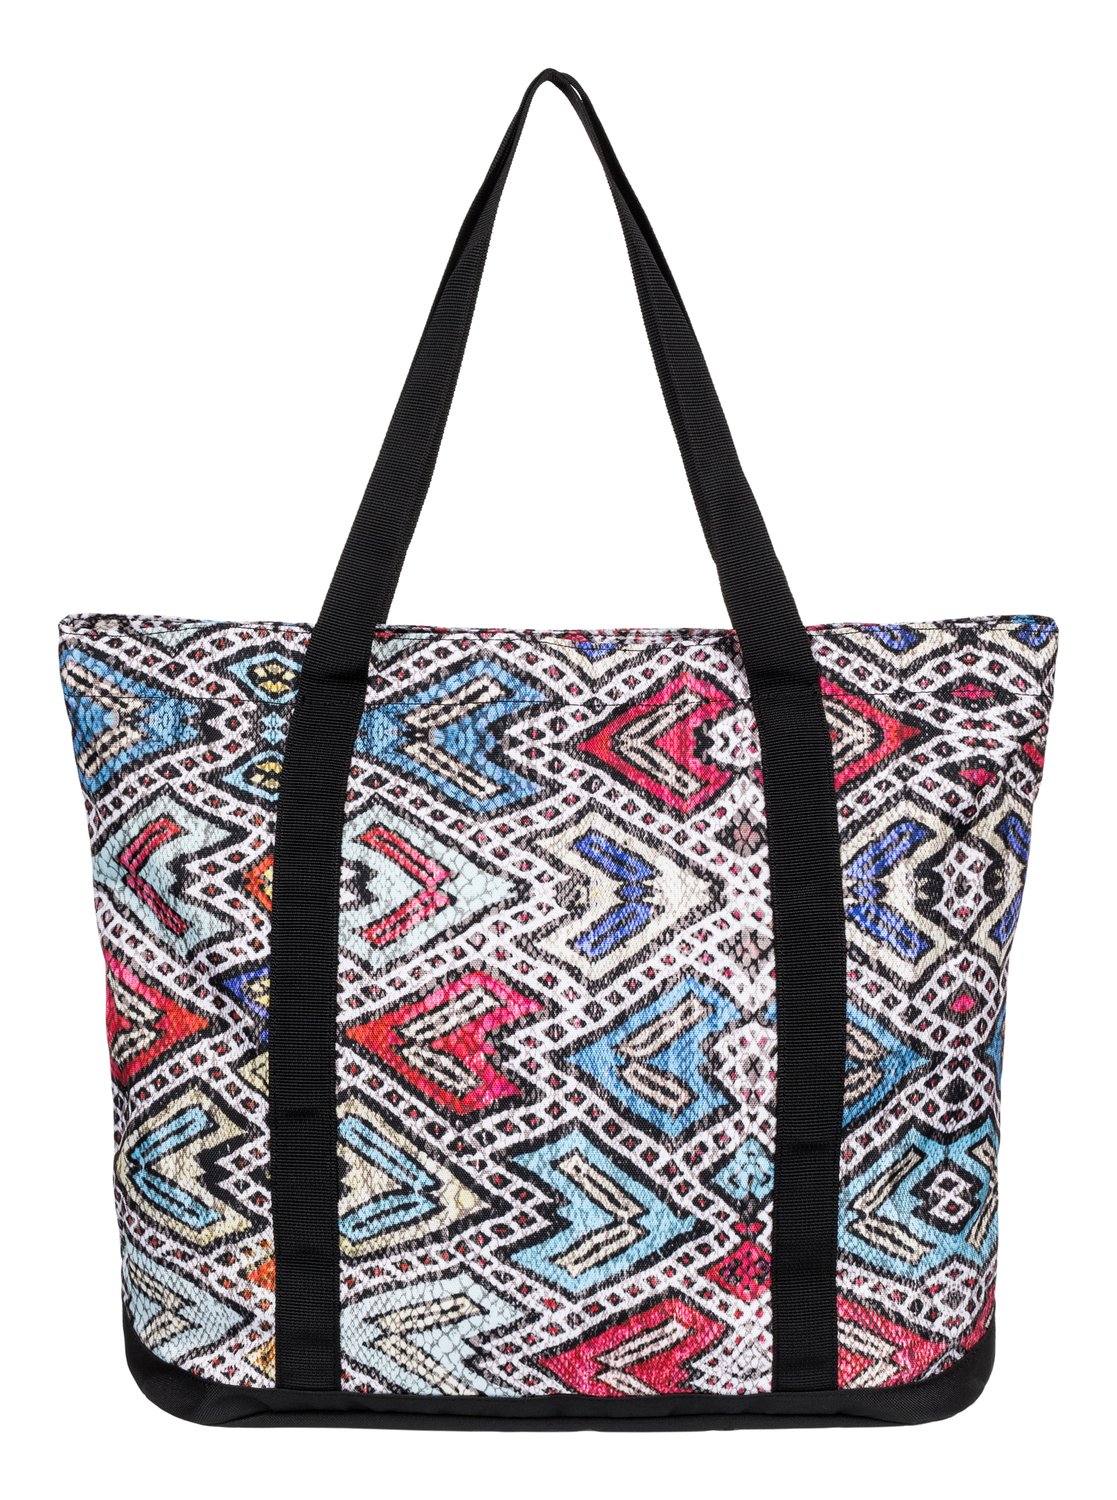 Other Side - A3 Tote Bag 3613372394058 | Roxy